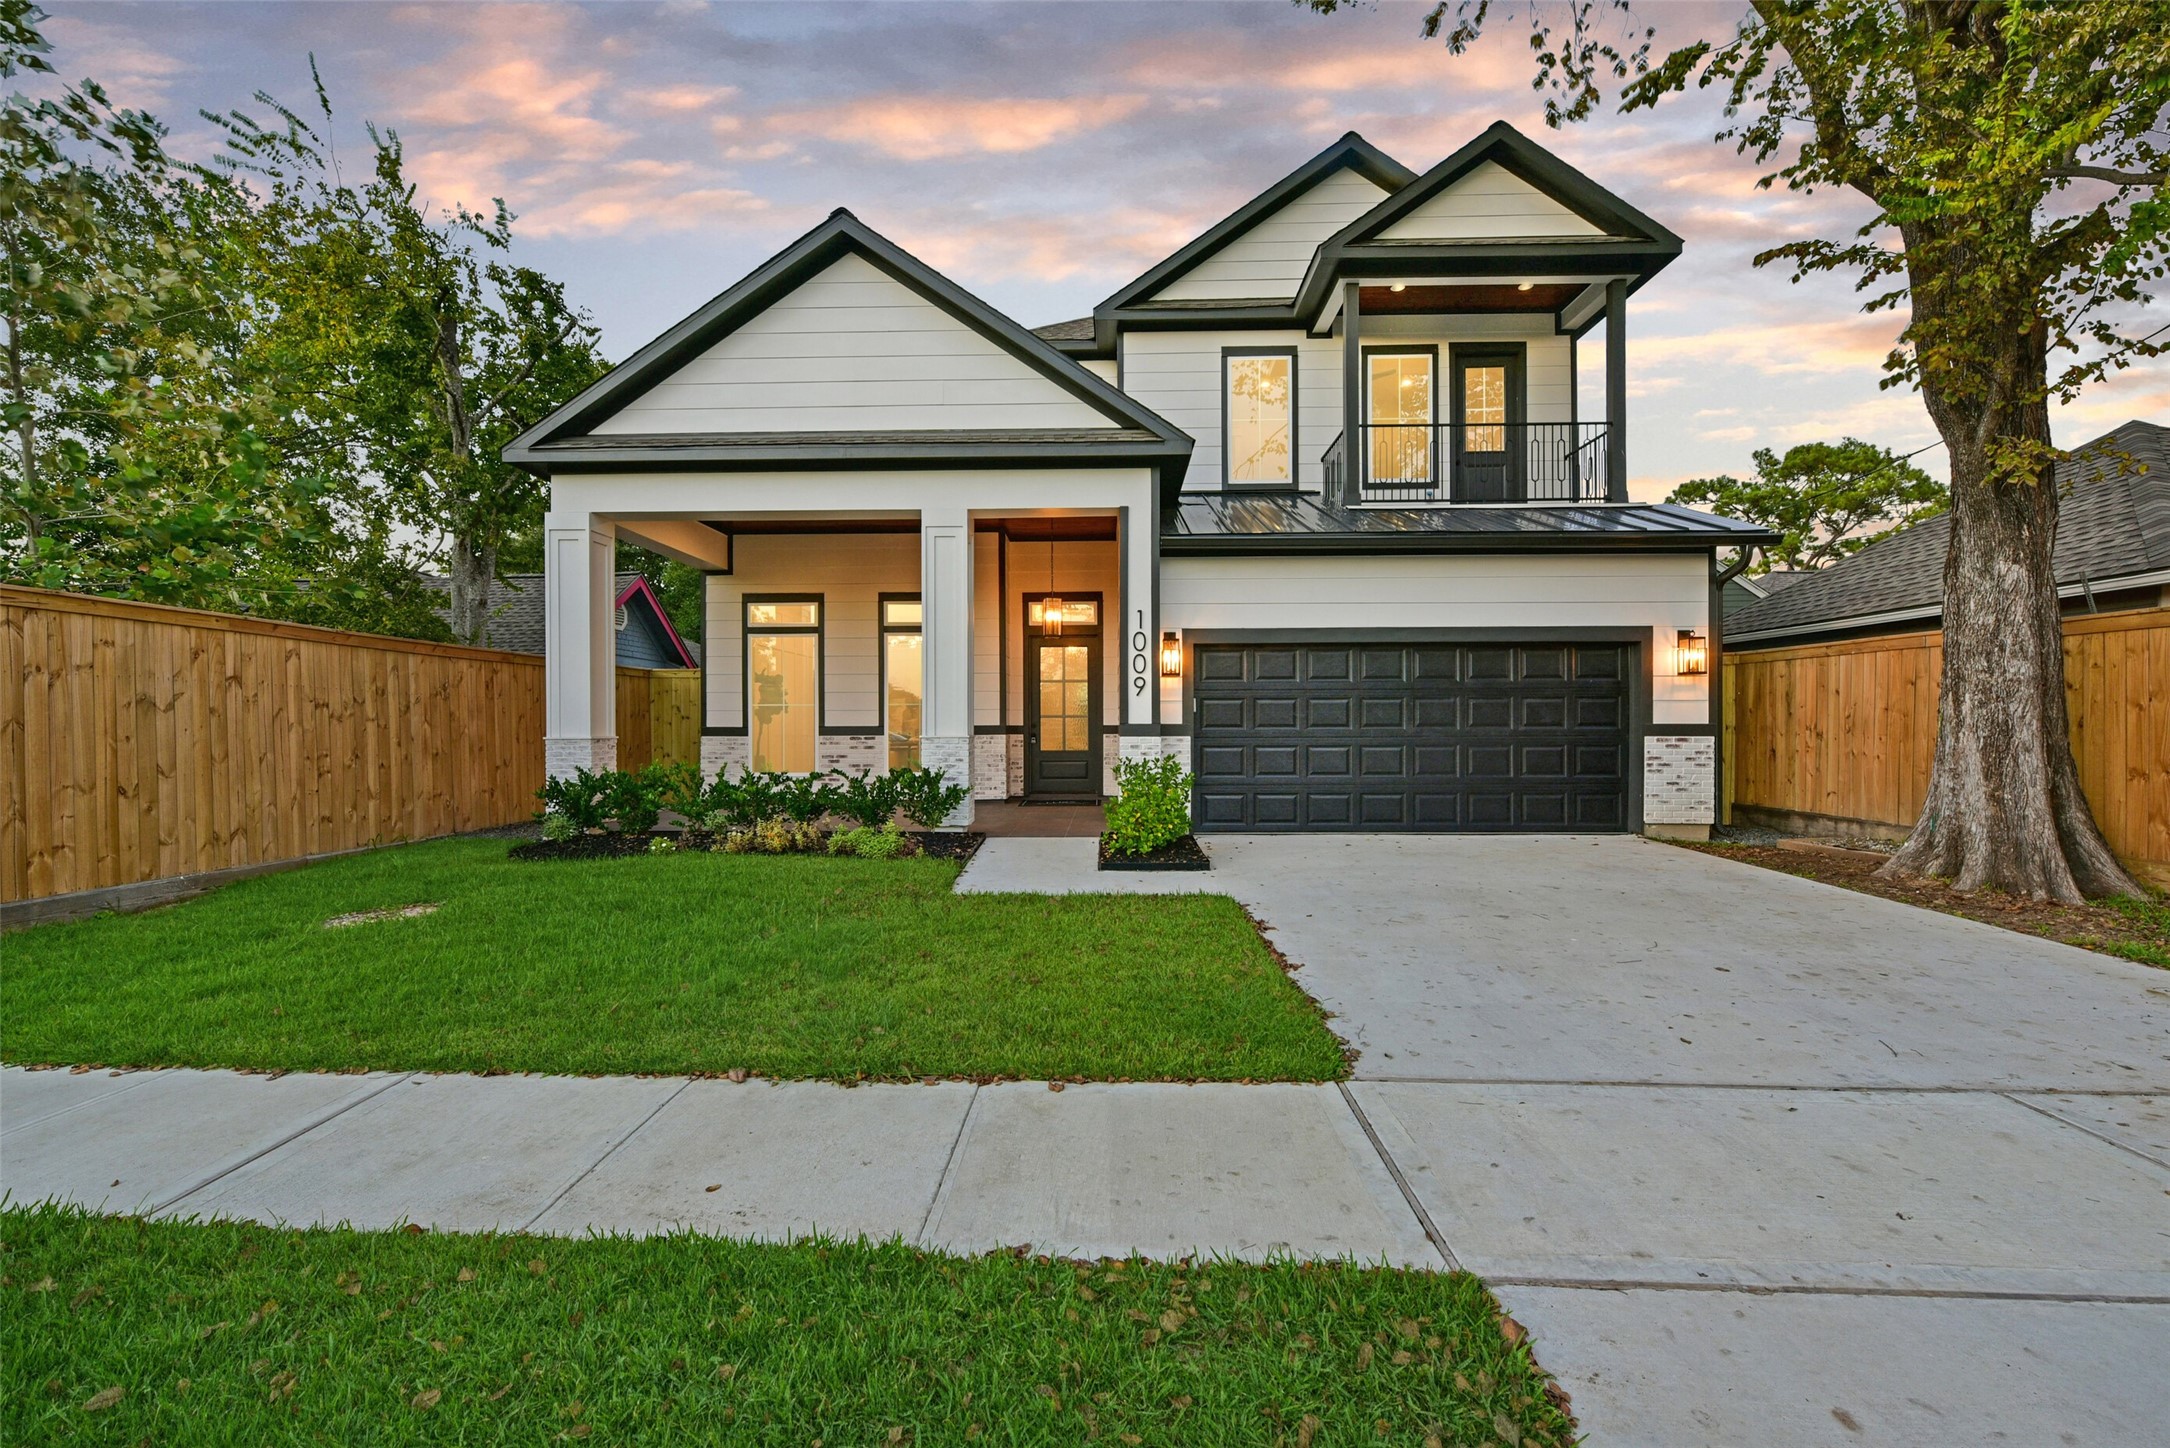 This craftsman style new construction in the Heights is across from Love Park, three blocks from some of the best restaurants the Heights has to offer and a block away from the Nicholson Hike and Bike trail.